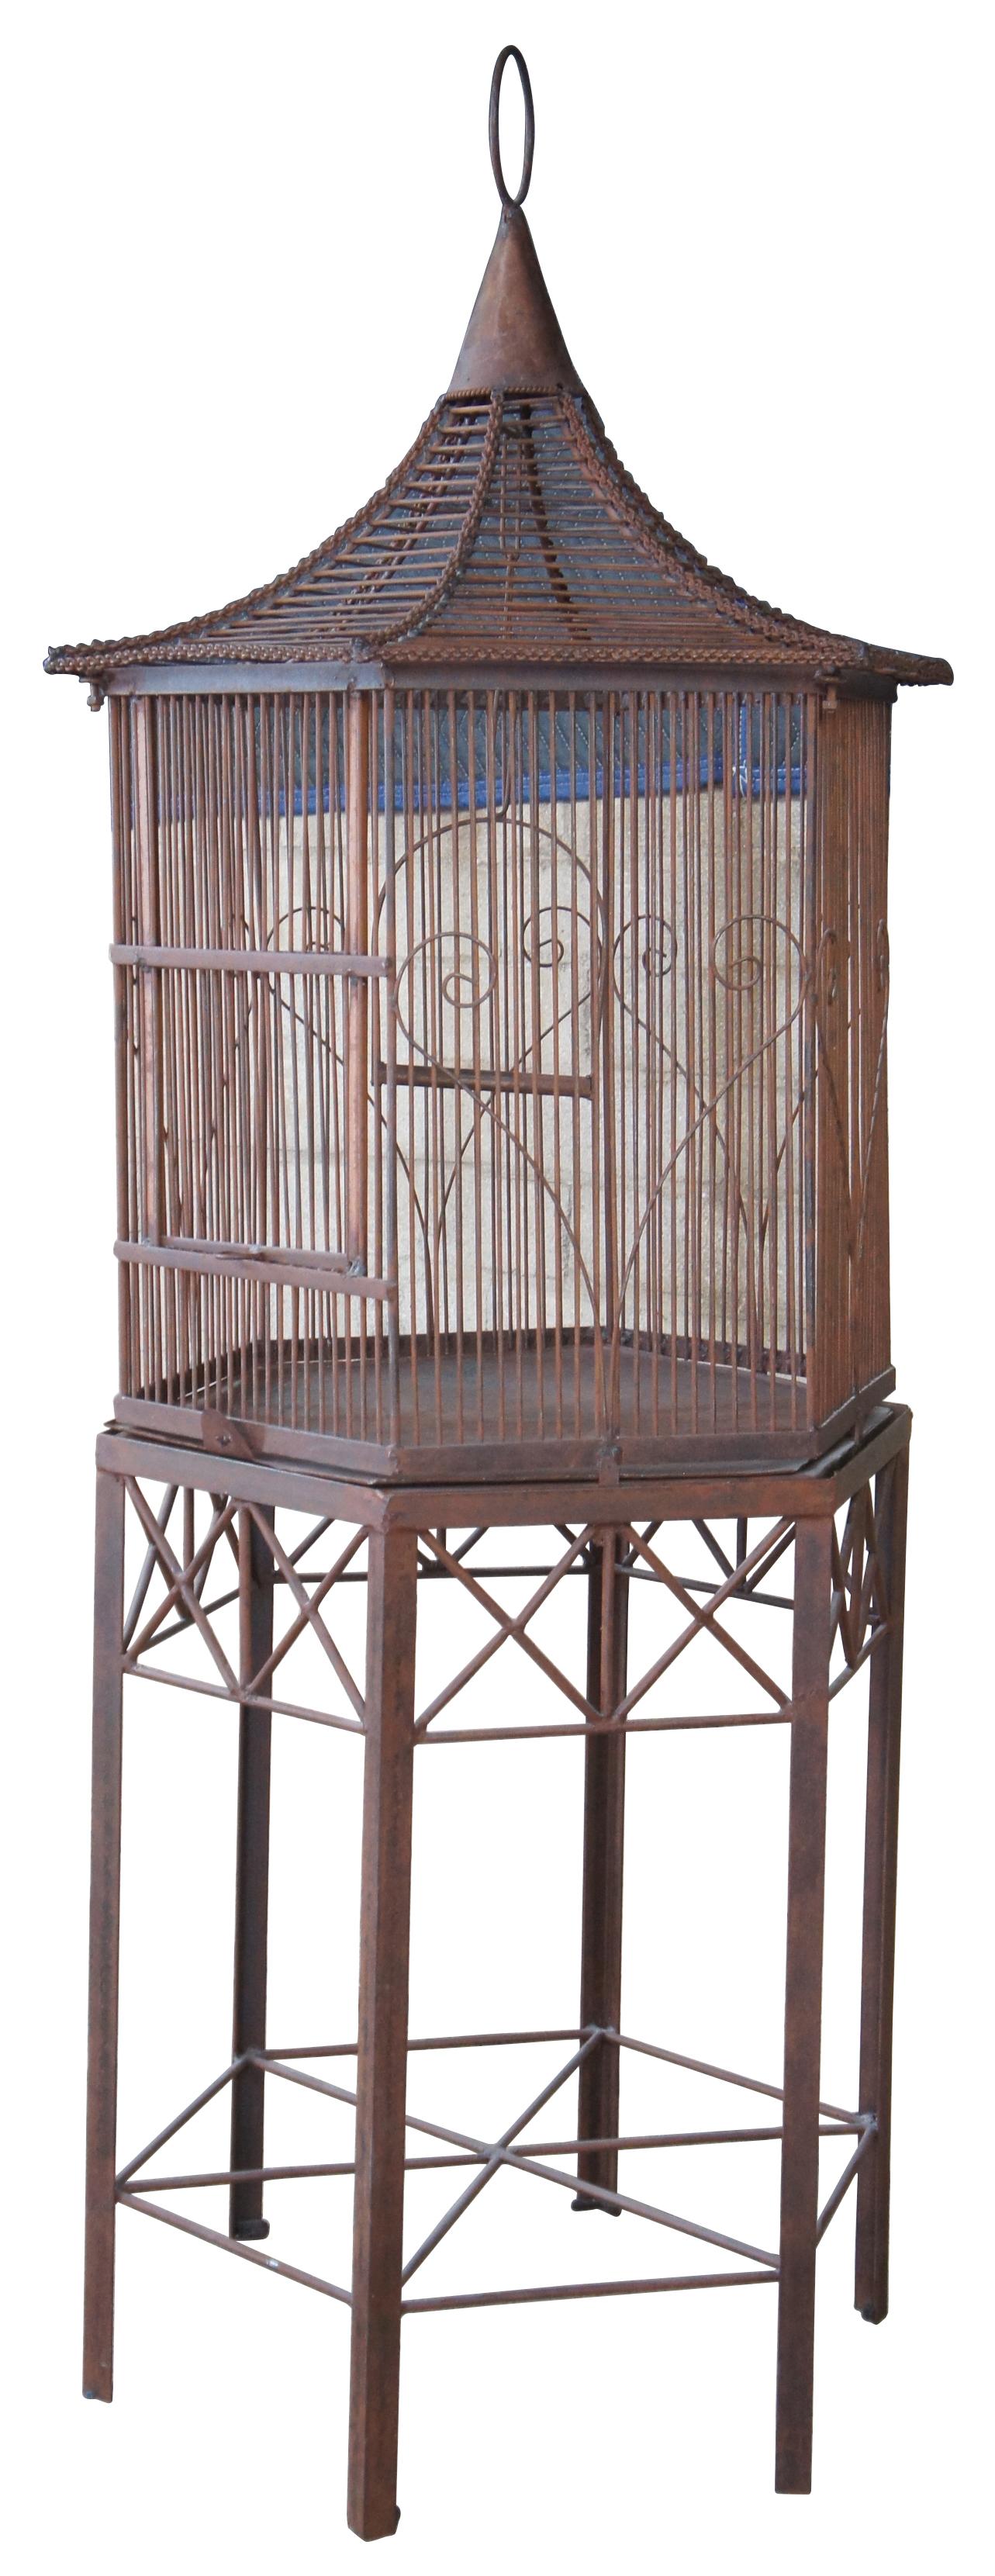 Vintage 20th century bird cage on stand. Made of iron with a pagoda style top and eight sided octogon house. Very nice action on the draw door.

Measures: 27